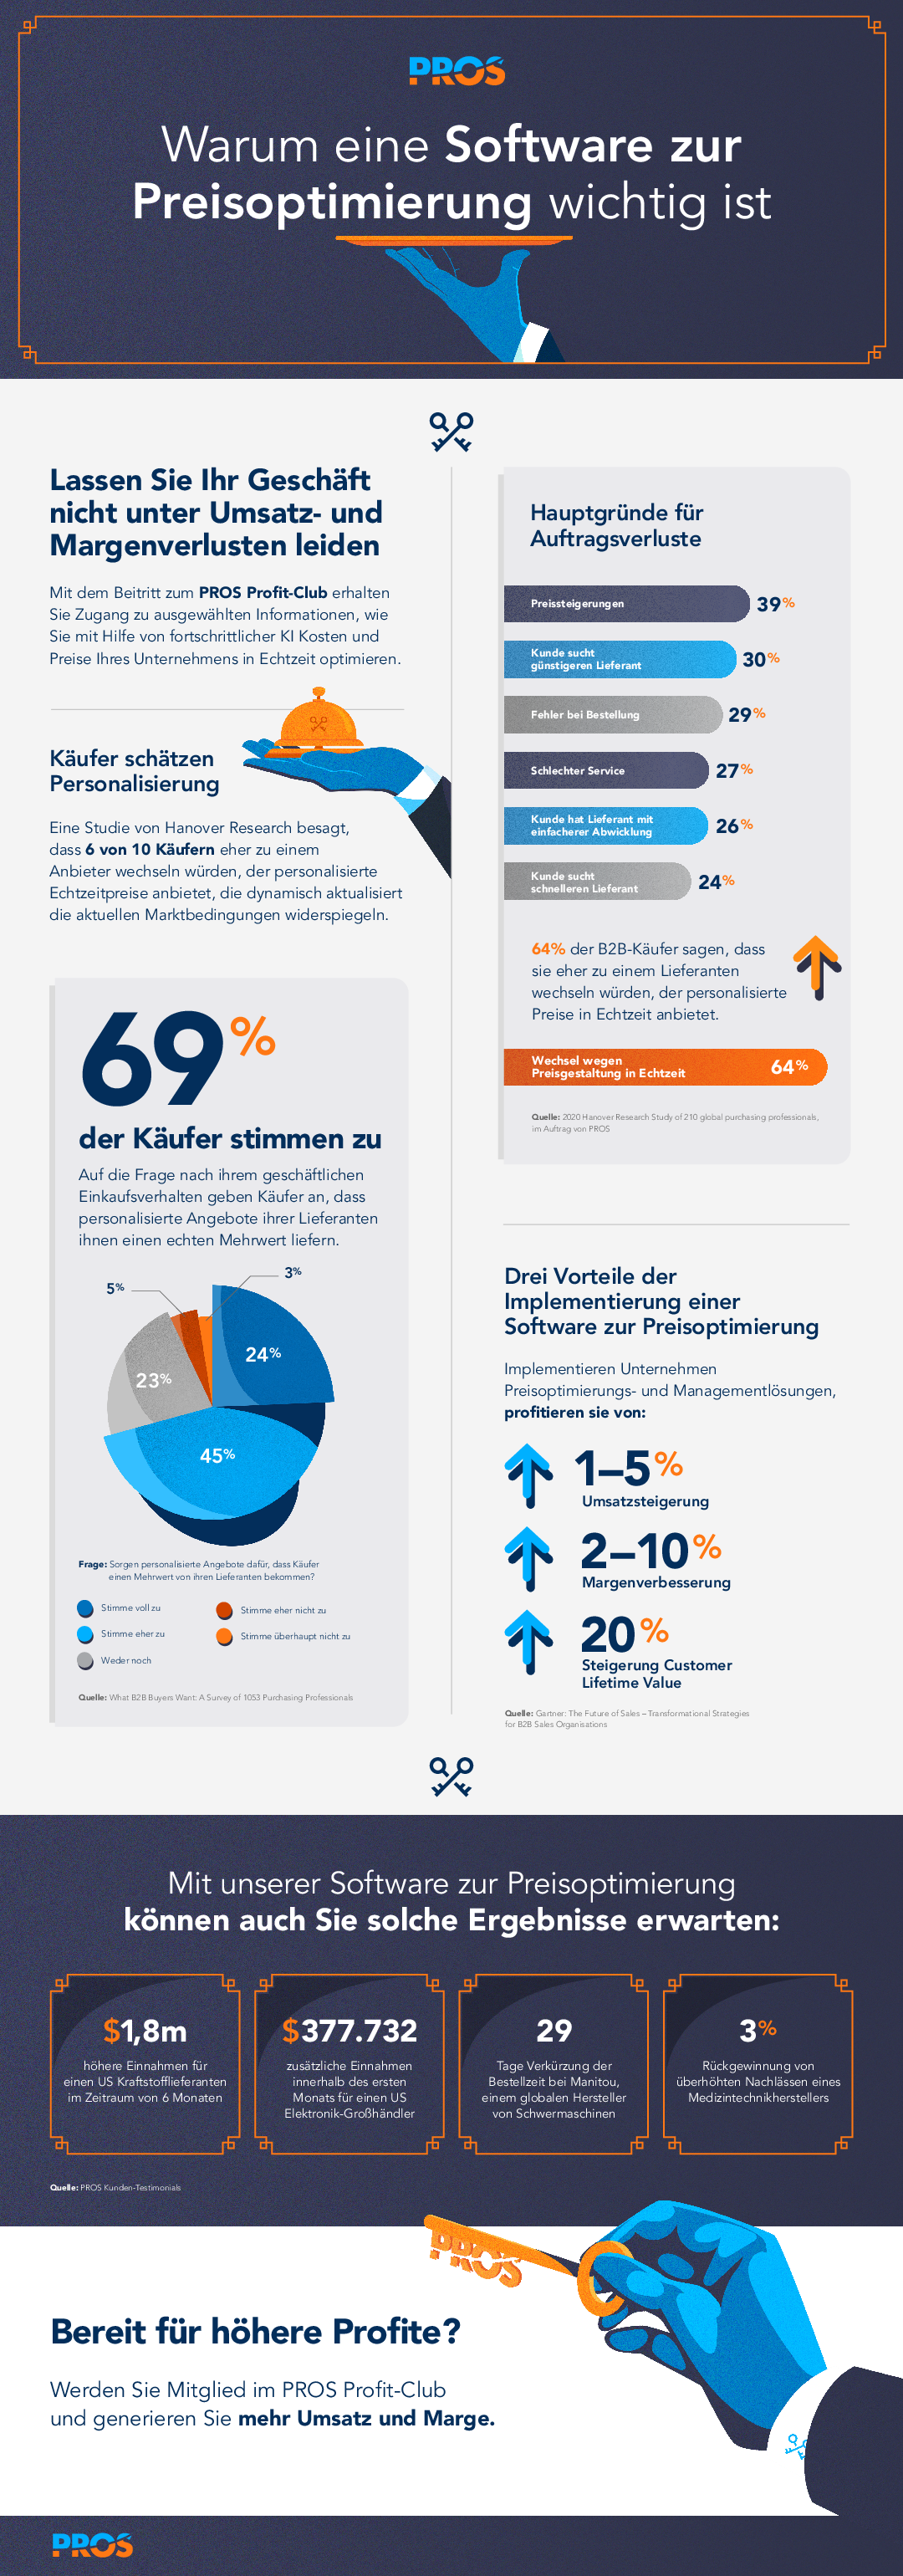 Thumb original pros dach infographic   without cta 2